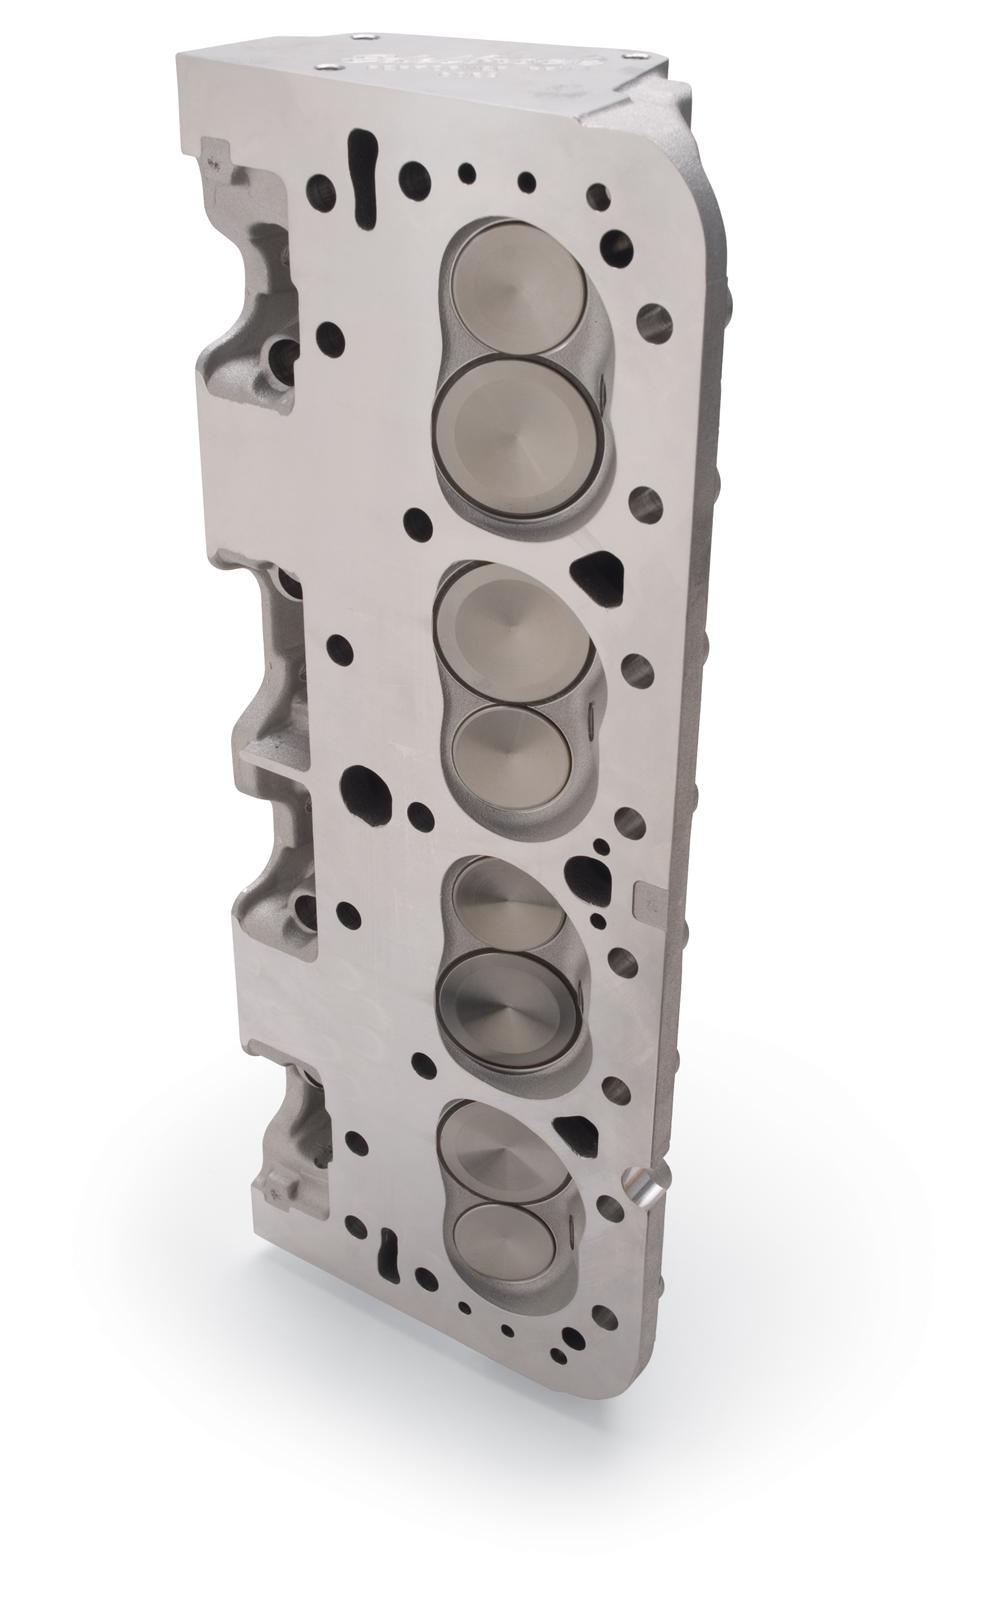 Cylinder Heads at Summit Racing